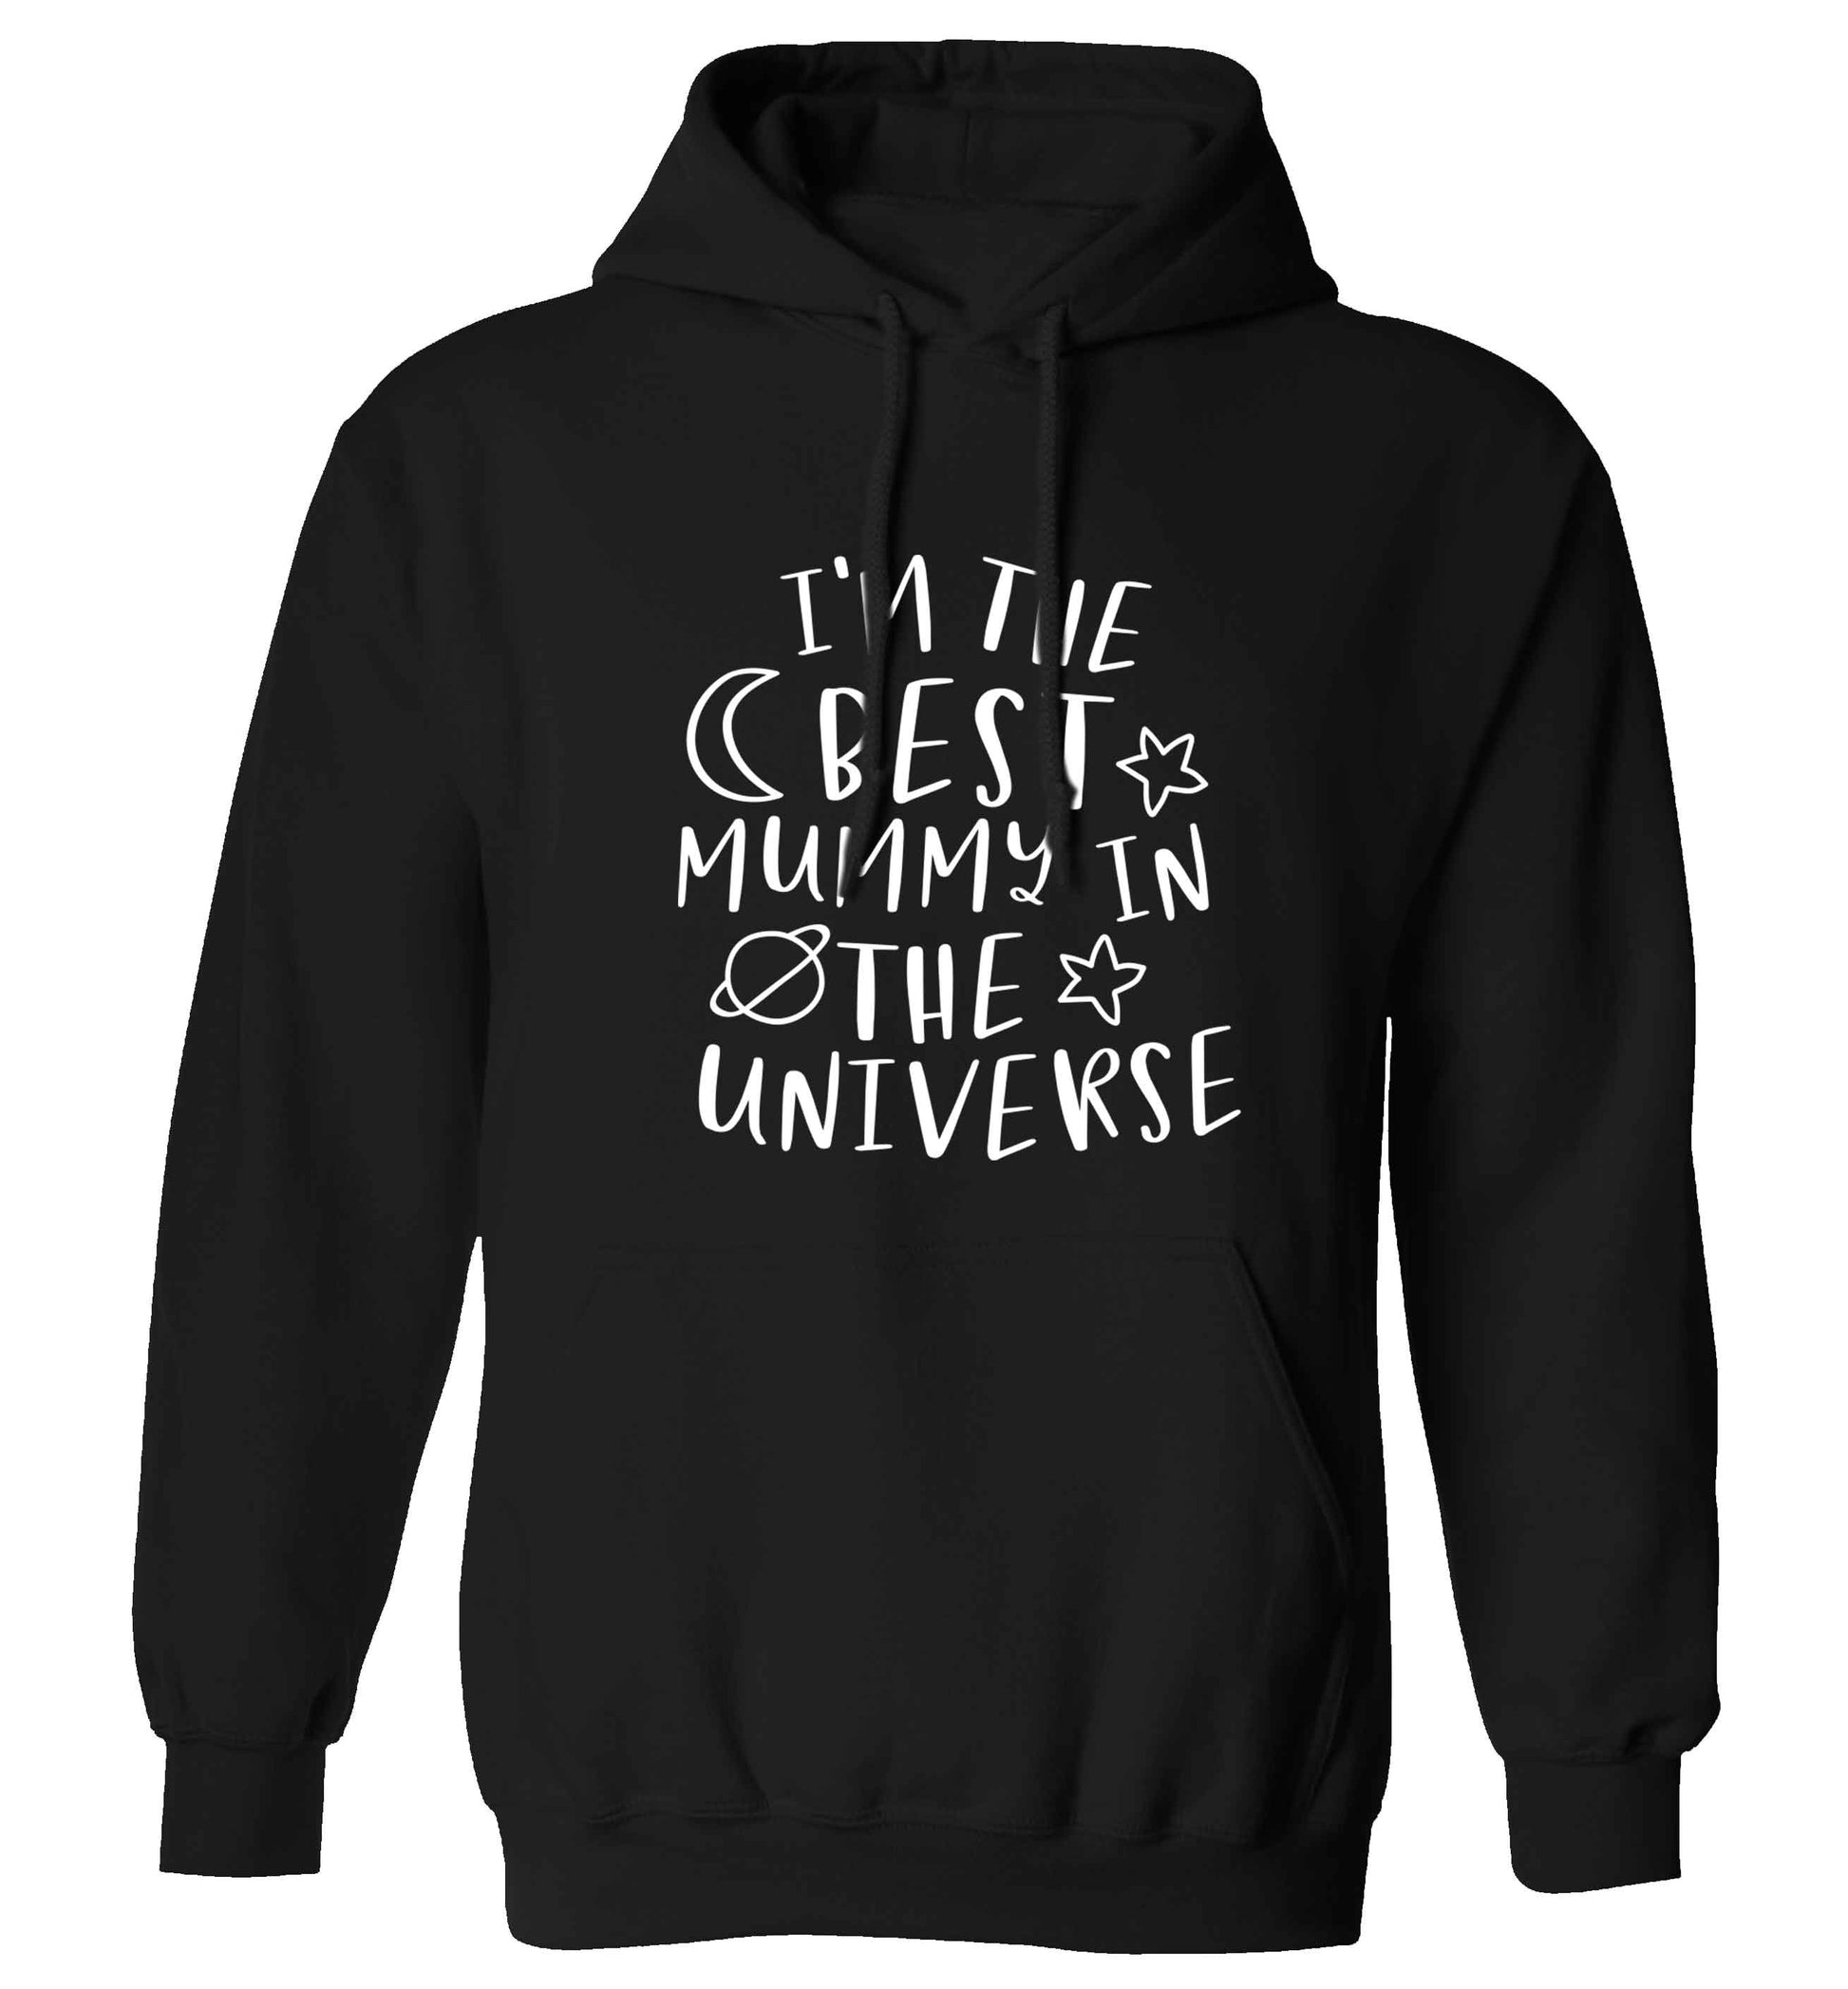 I'm the best mummy in the universe adults unisex black hoodie 2XL